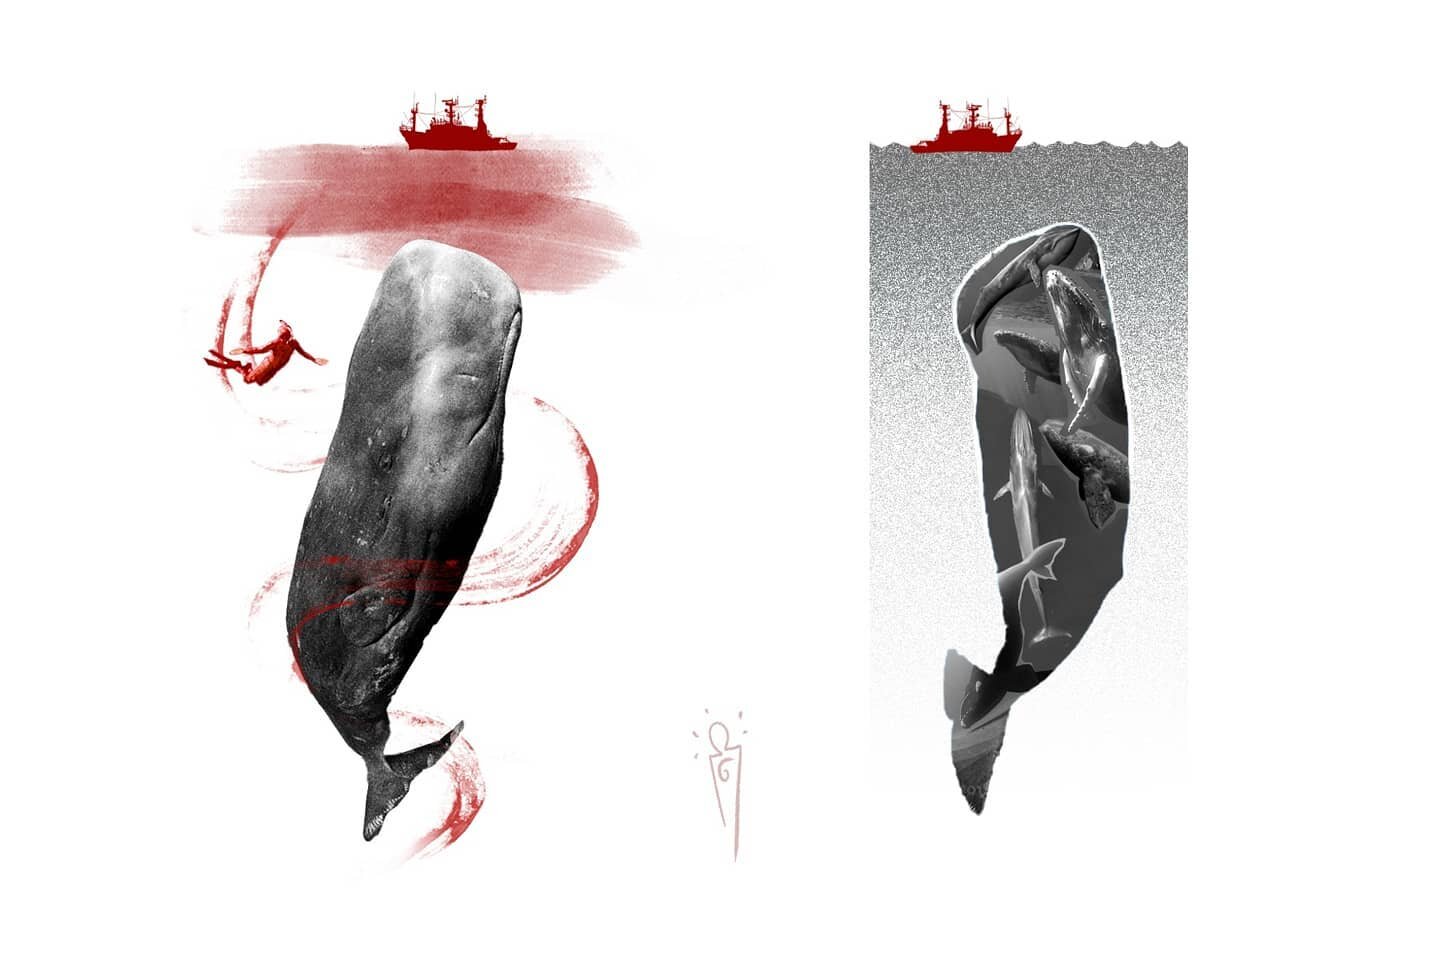 Concepts for a whale conservation tattoo inspired by the work of the sea shepherds.

Which one do you guys like best? 

#whaletattoo #seashepherd #antipoaching #endangeredspecies #whales